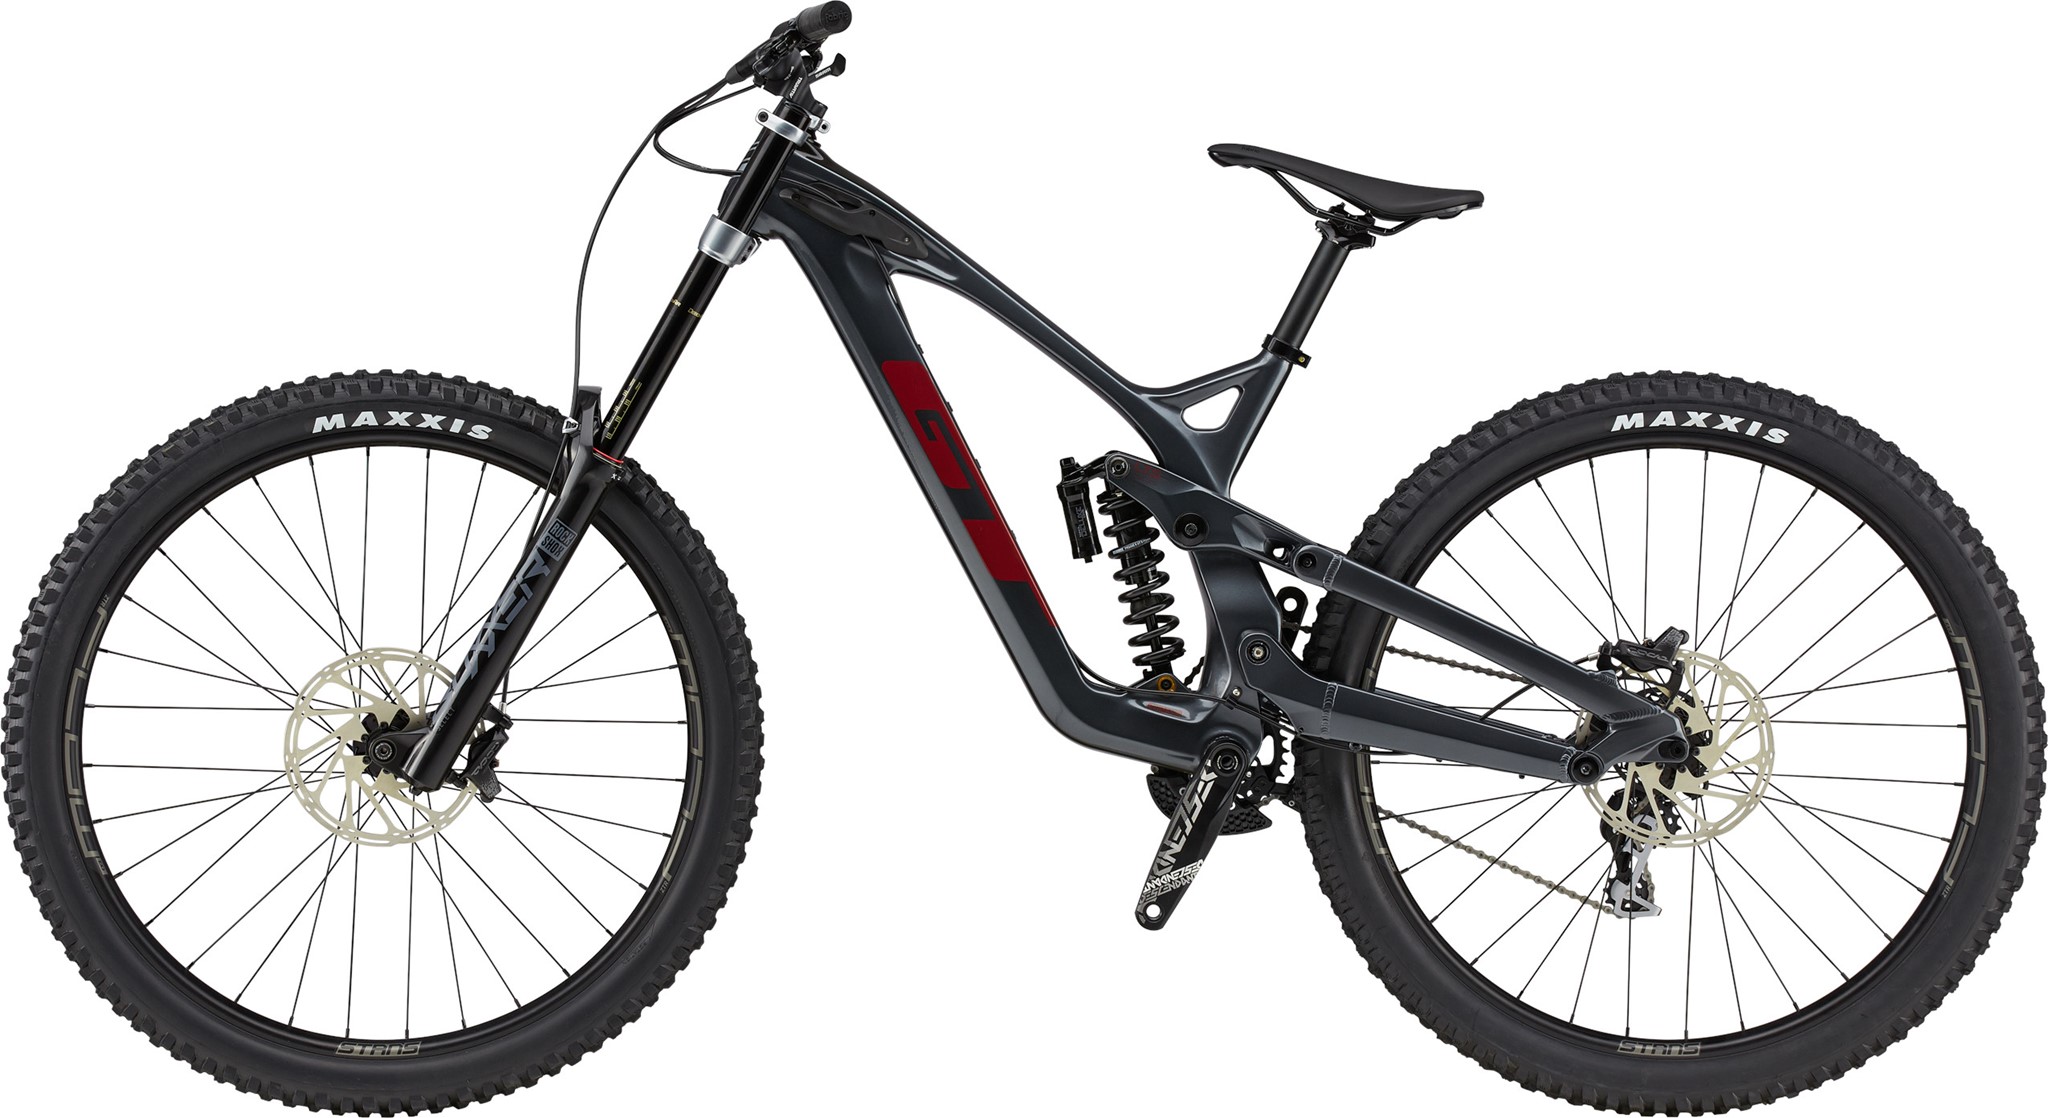 Bonde Let at ske bremse GT Fury Pro 27.5"/29" Carbon Downhill Bike 2021 | The Cyclery